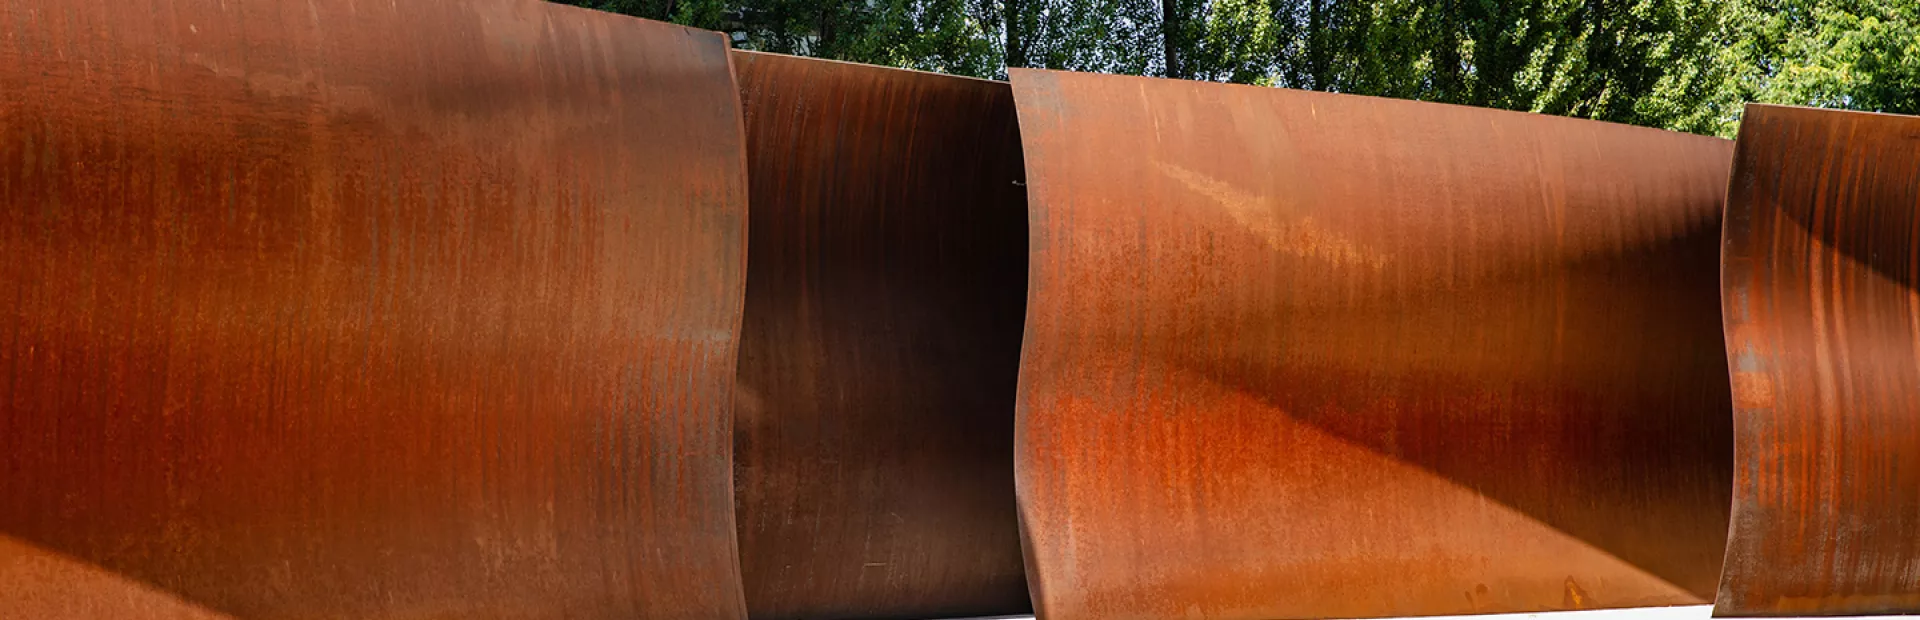 Dirk's Pod by Richard Serra, a large-scale sculpture on campus consisting of tall, waved walls